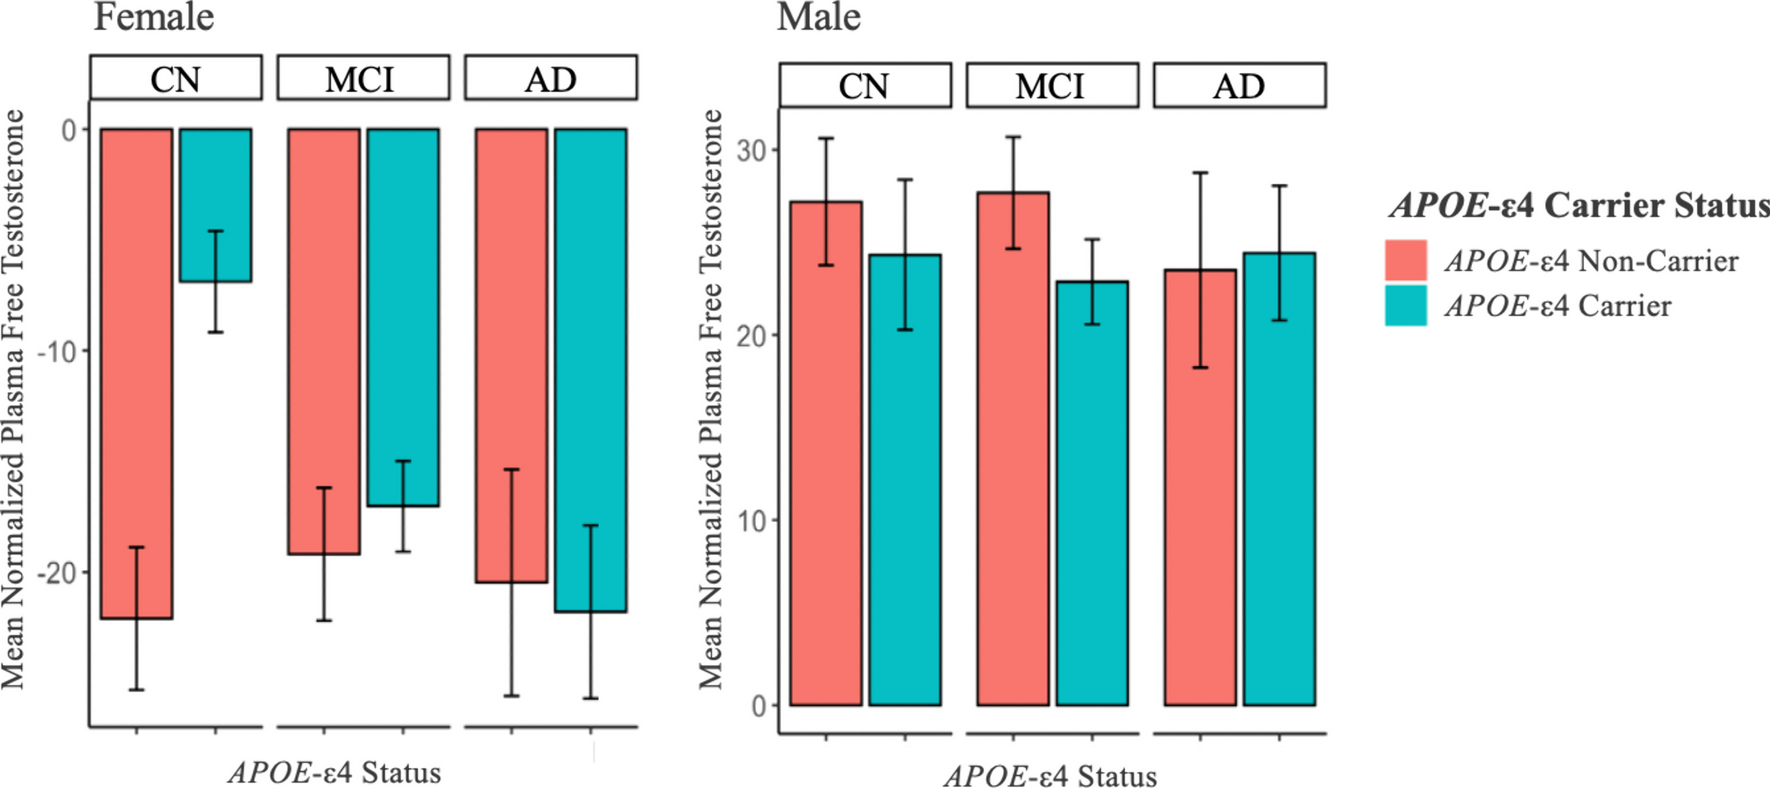 Low testosterone levels relate to poorer cognitive function in women in an APOE-ε4-dependant manner